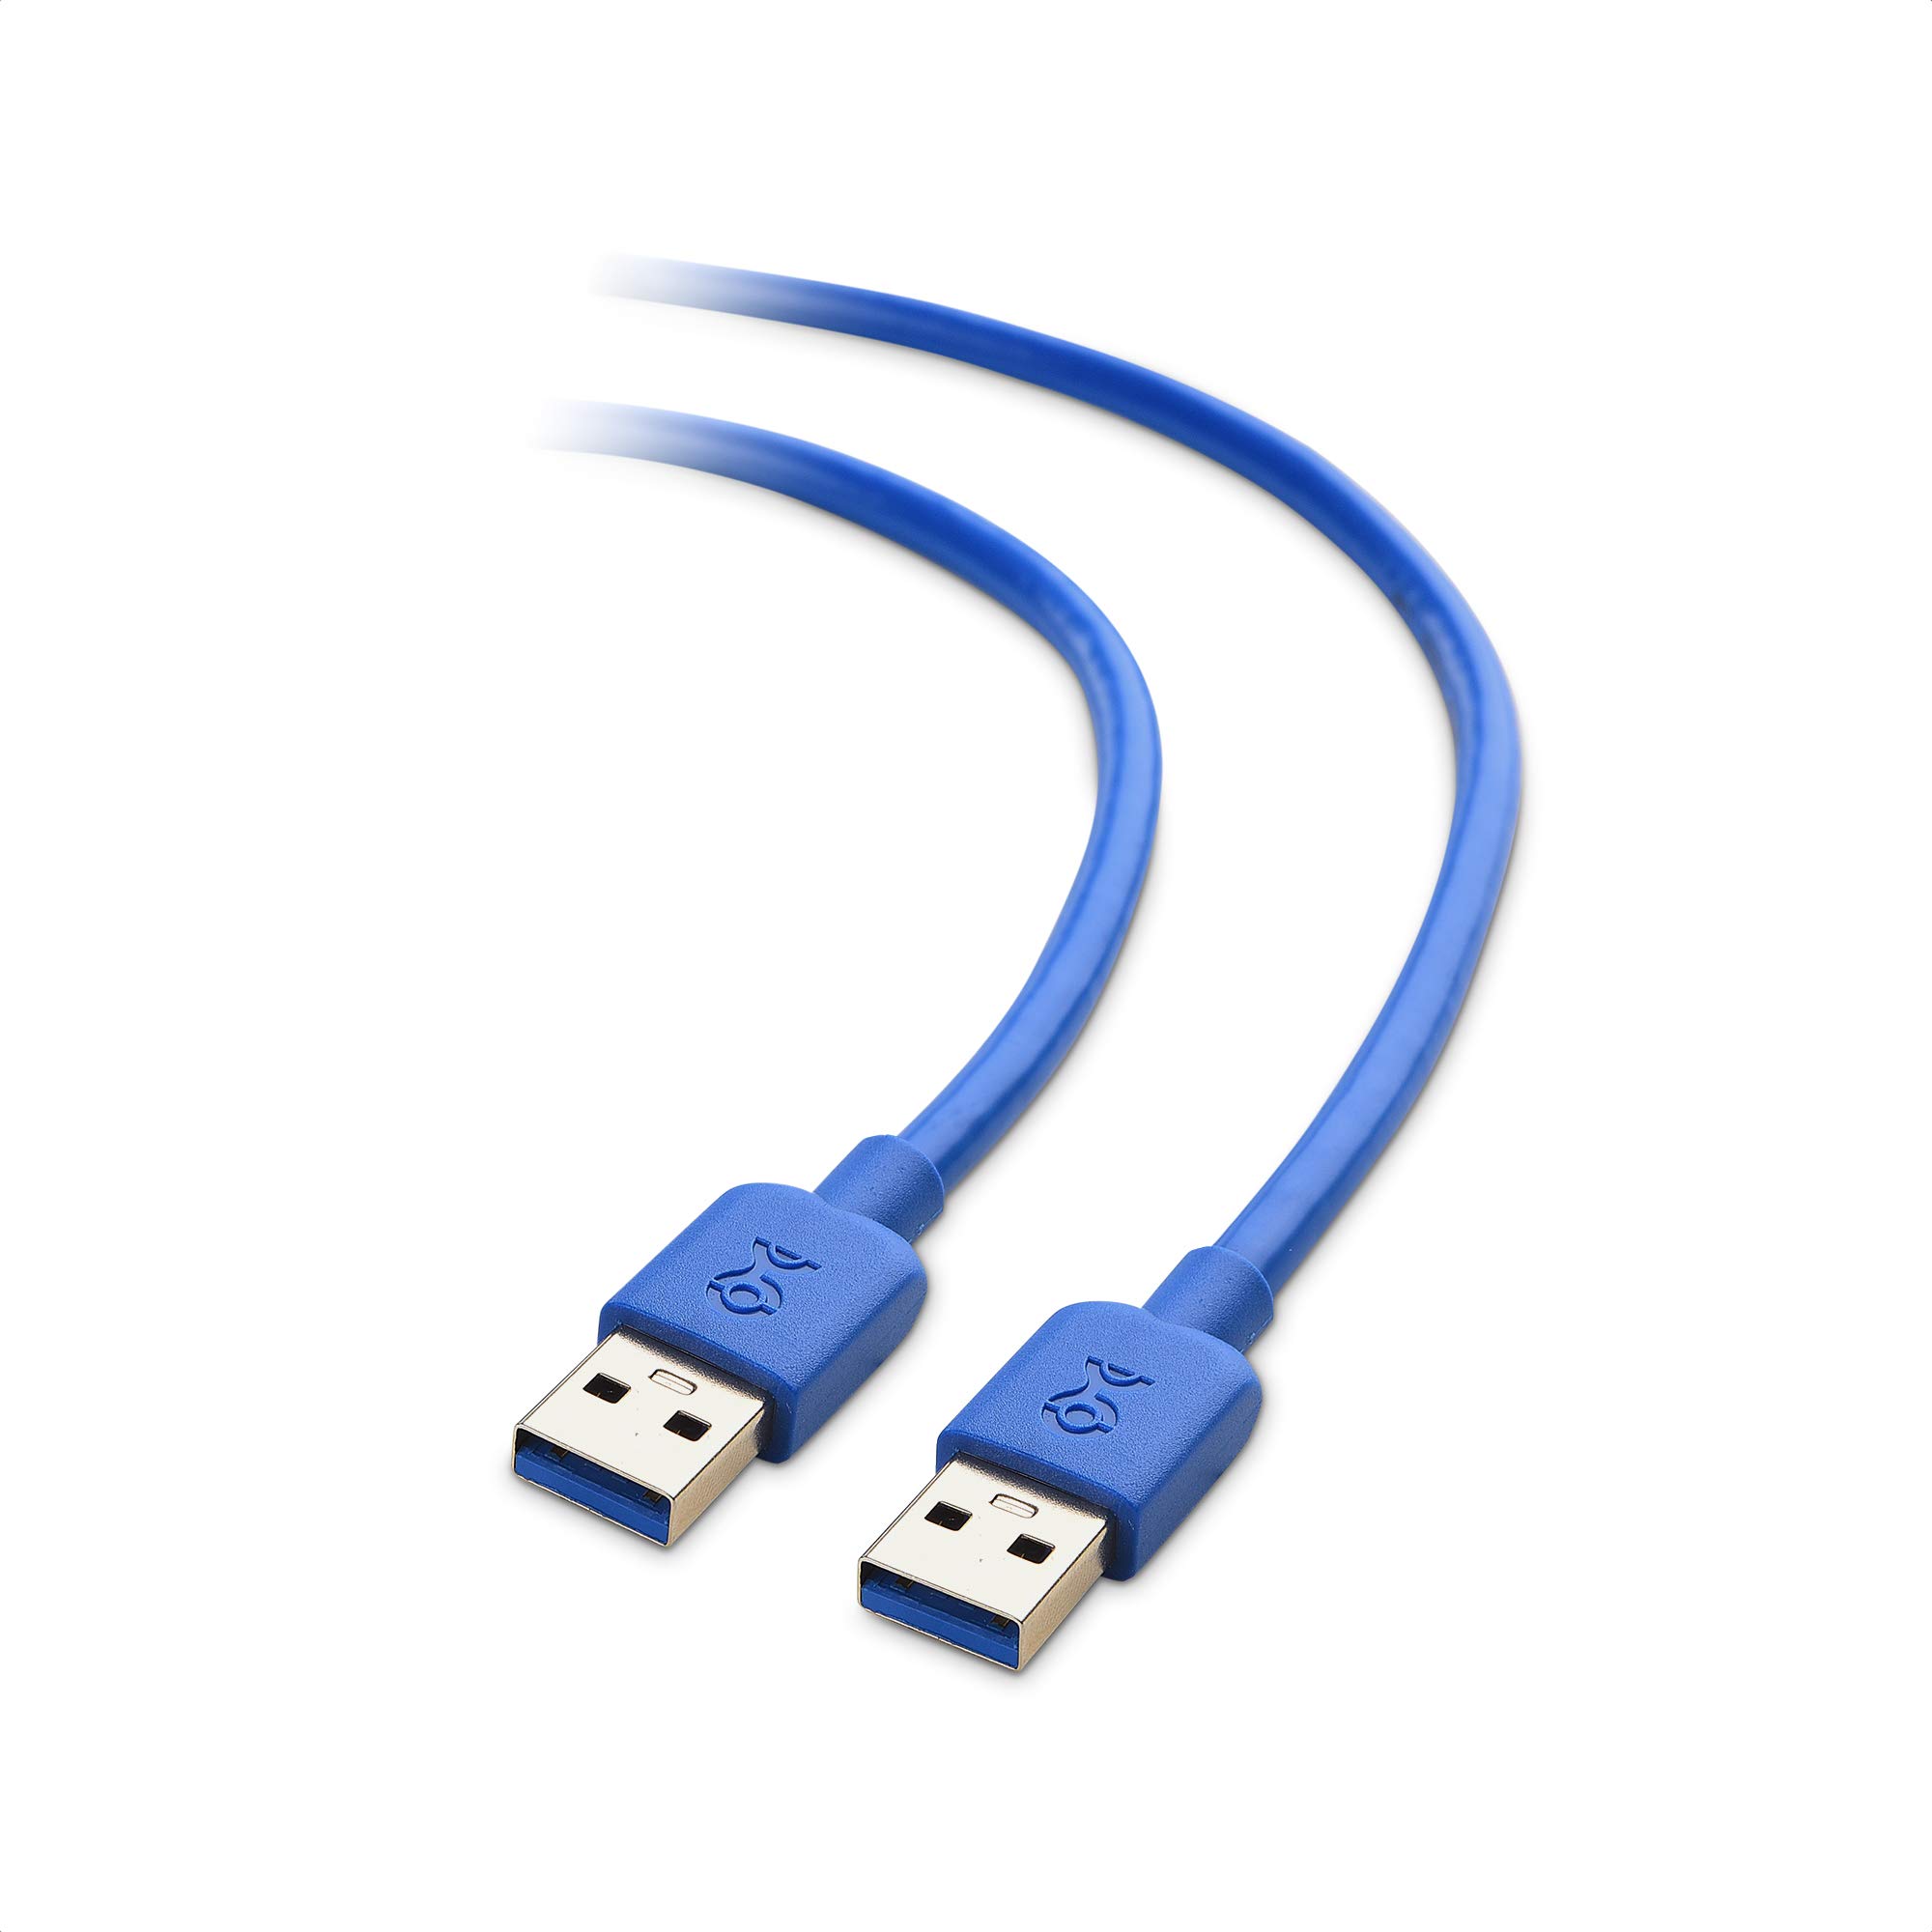 Book Cover Cable Matters 2-Pack USB 3.0 Cable 3ft, USB to USB Cable/USB A to USB A Cable/Male to Male USB Cord/Double USB Cord in Blue 3 Feet Blue 2